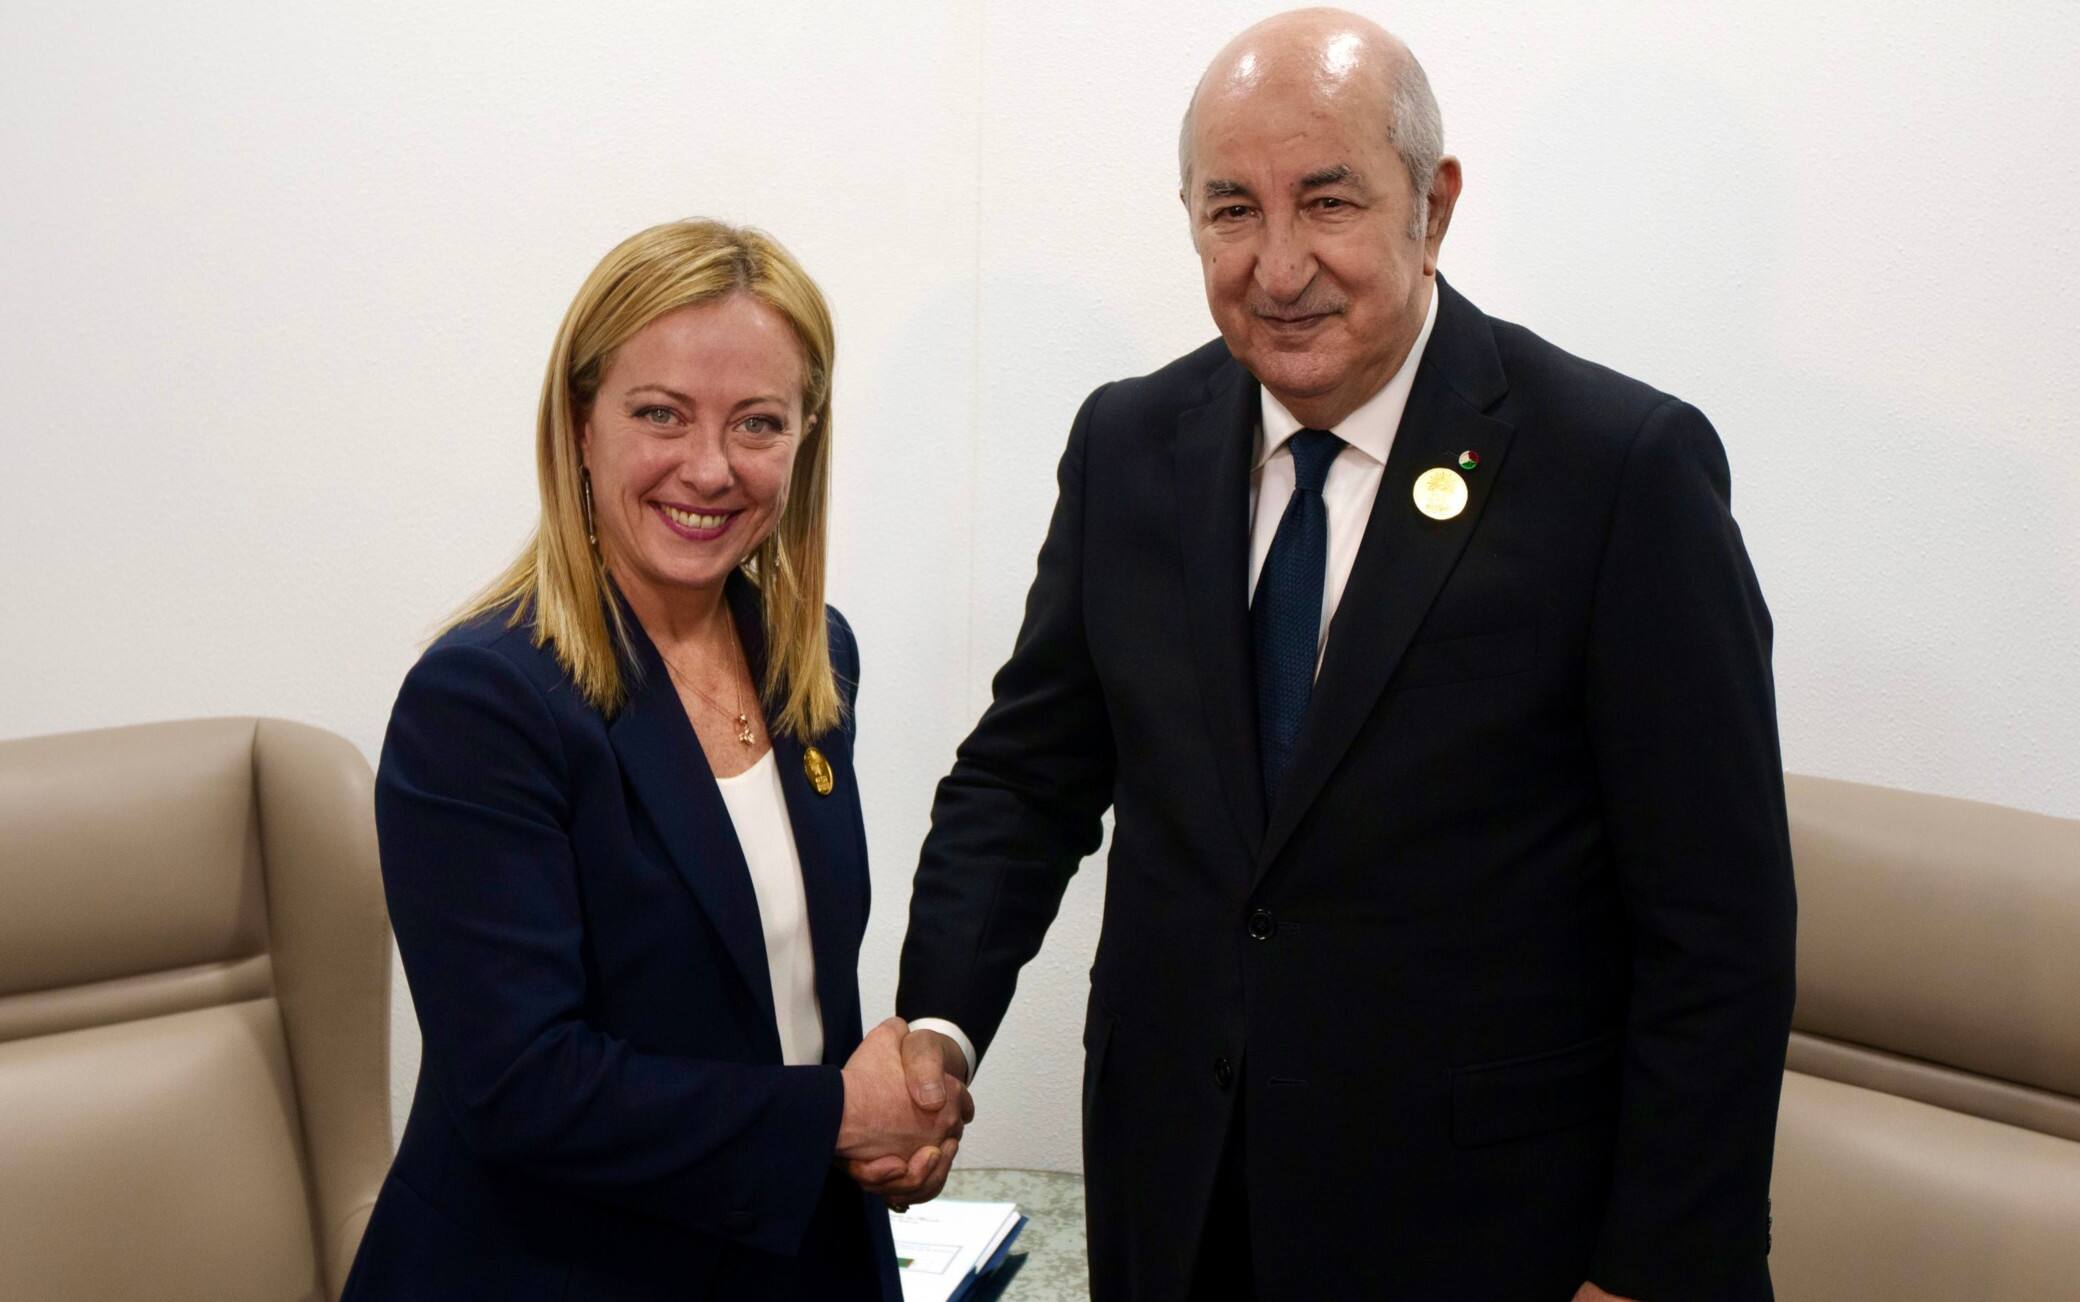 A handout photo made available by the Italian government press office shows Italian president Giorgia Meloni (L) with Algerian President Abdelmadjid Tebboune during the high-level meetings of COP27, the United Nations climate conference in Sharm el-Sheikh, Egypt, 07 November 2022.
ANSA/ITALIAN GOVERNMENT PRESS OFFICE/FILIPPO ATTILI
+++ ANSA PROVIDES ACCESS TO THIS HANDOUT PHOTO TO BE USED SOLELY TO ILLUSTRATE NEWS REPORTING OR COMMENTARY ON THE FACTS OR EVENTS DEPICTED IN THIS IMAGE; NO ARCHIVING; NO LICENSING +++